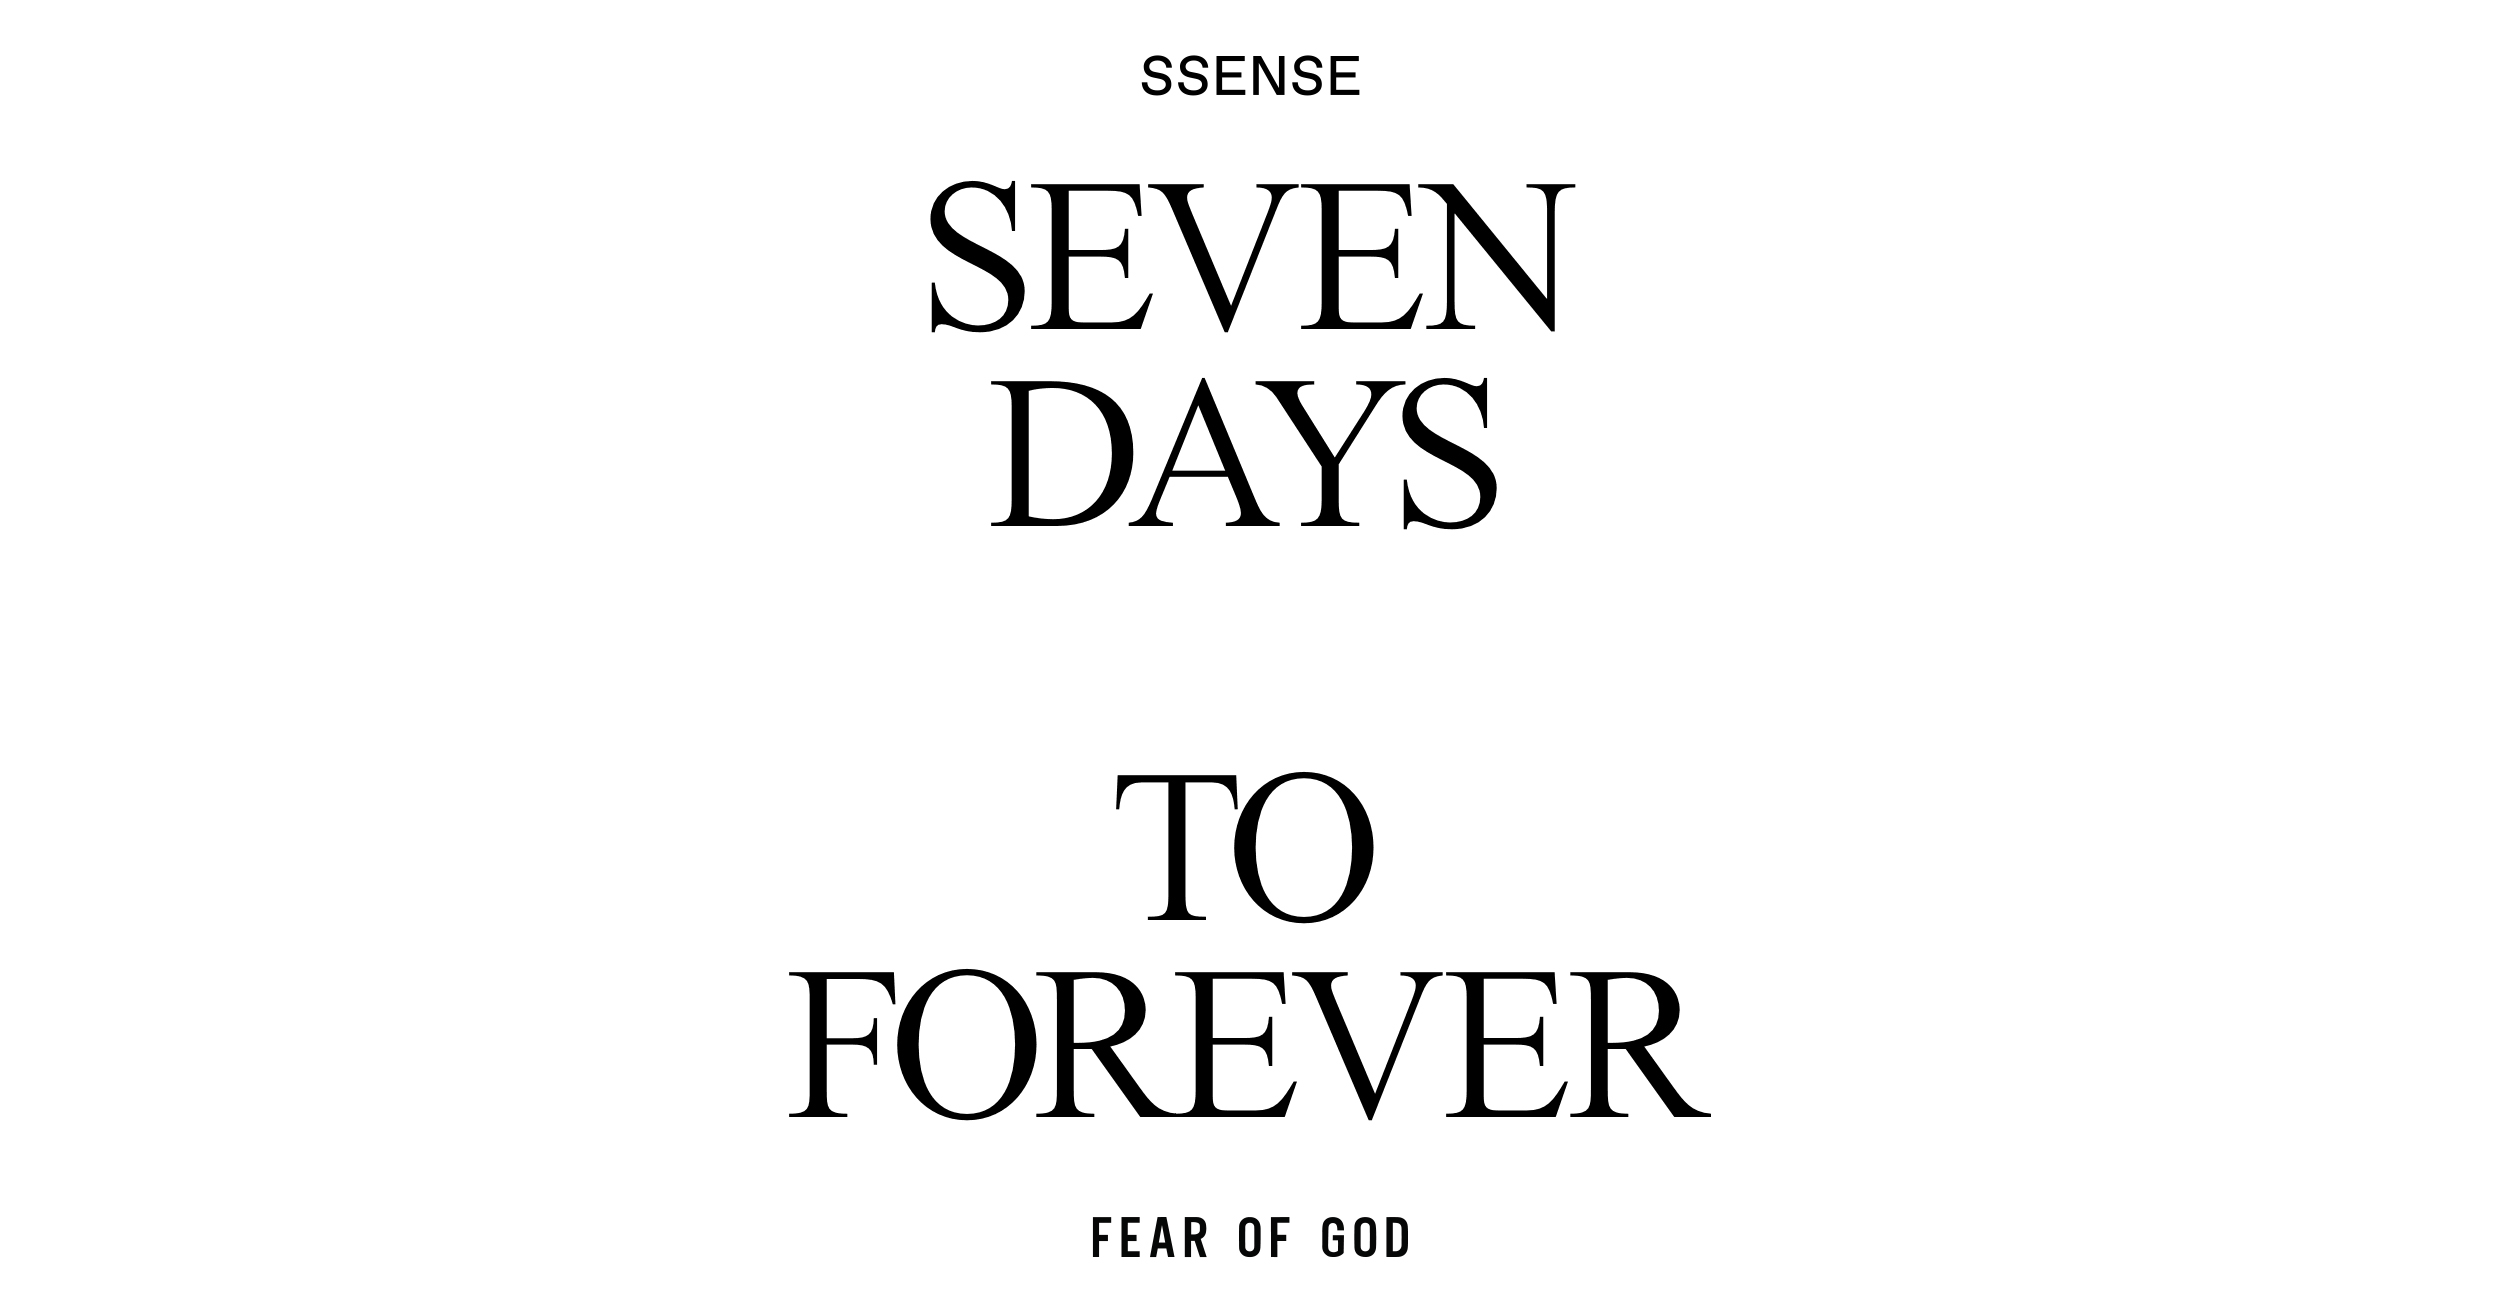 SSENSE : Seven Days to Forever